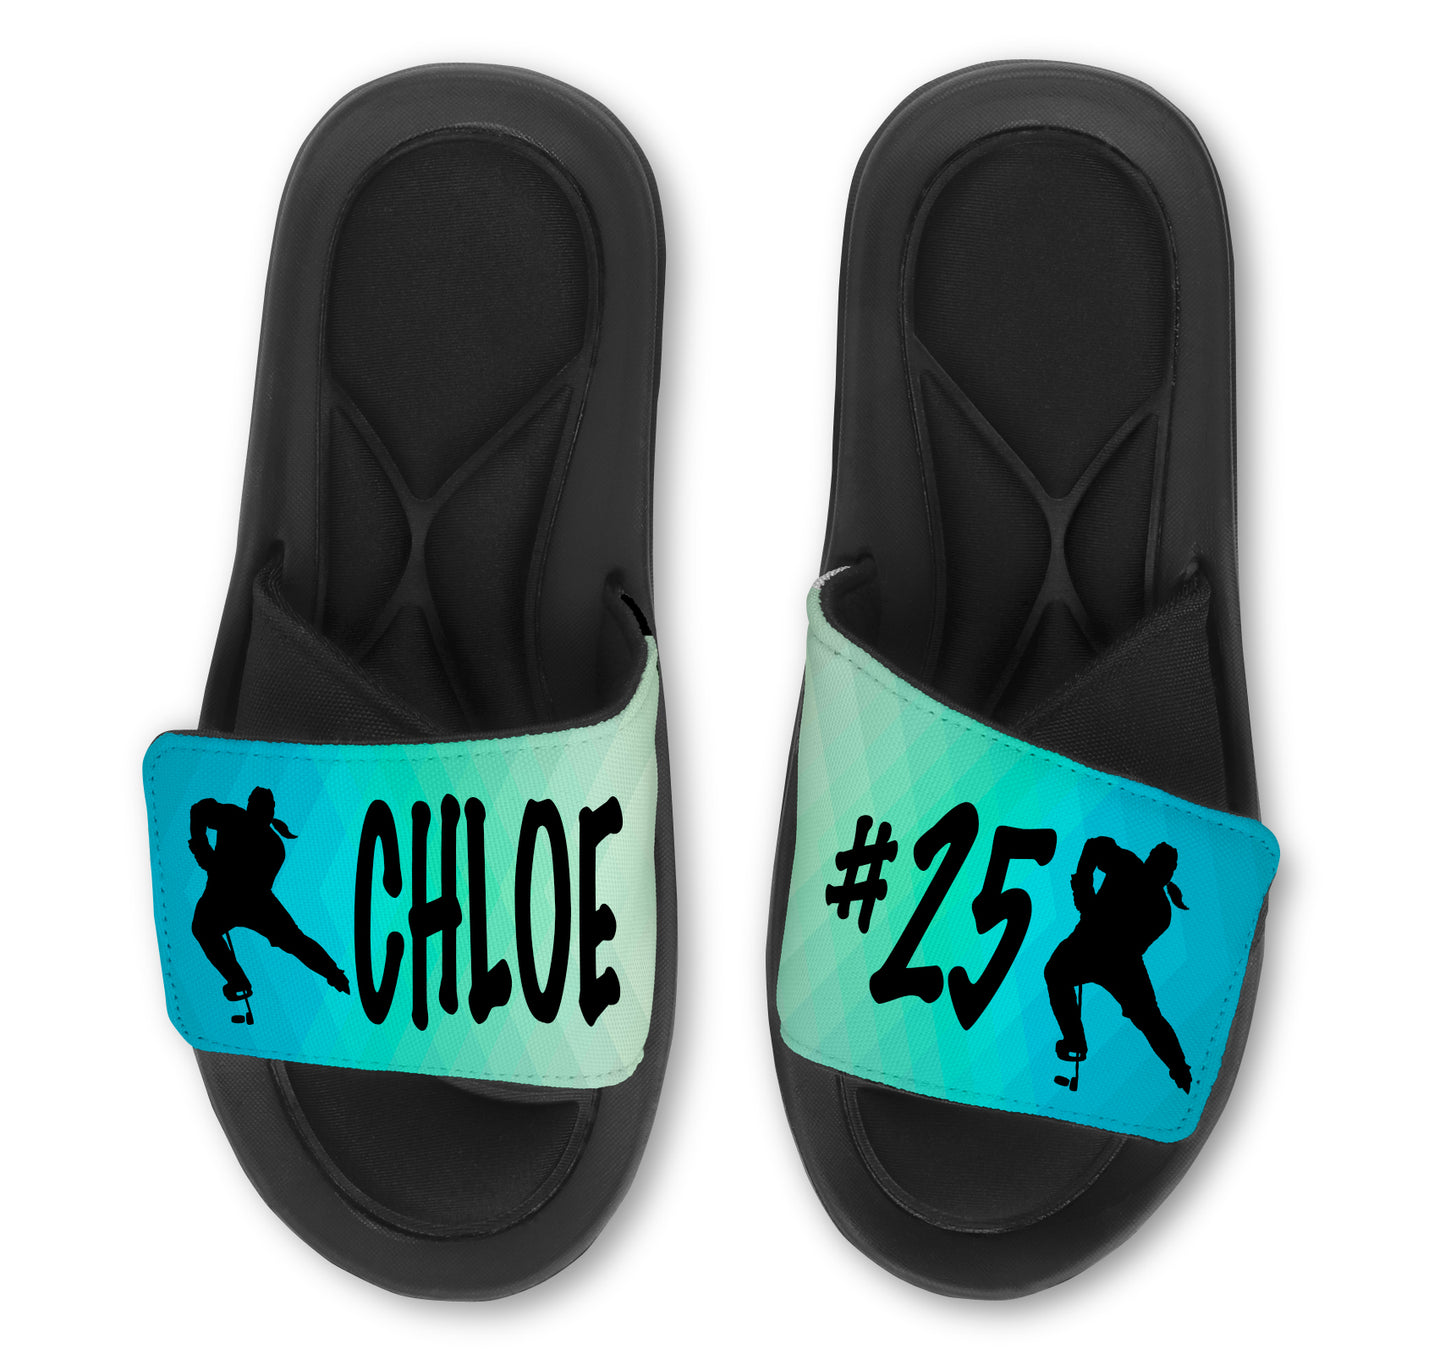 Hockey Abstract Custom Slides / Sandals - Choose your Background Color